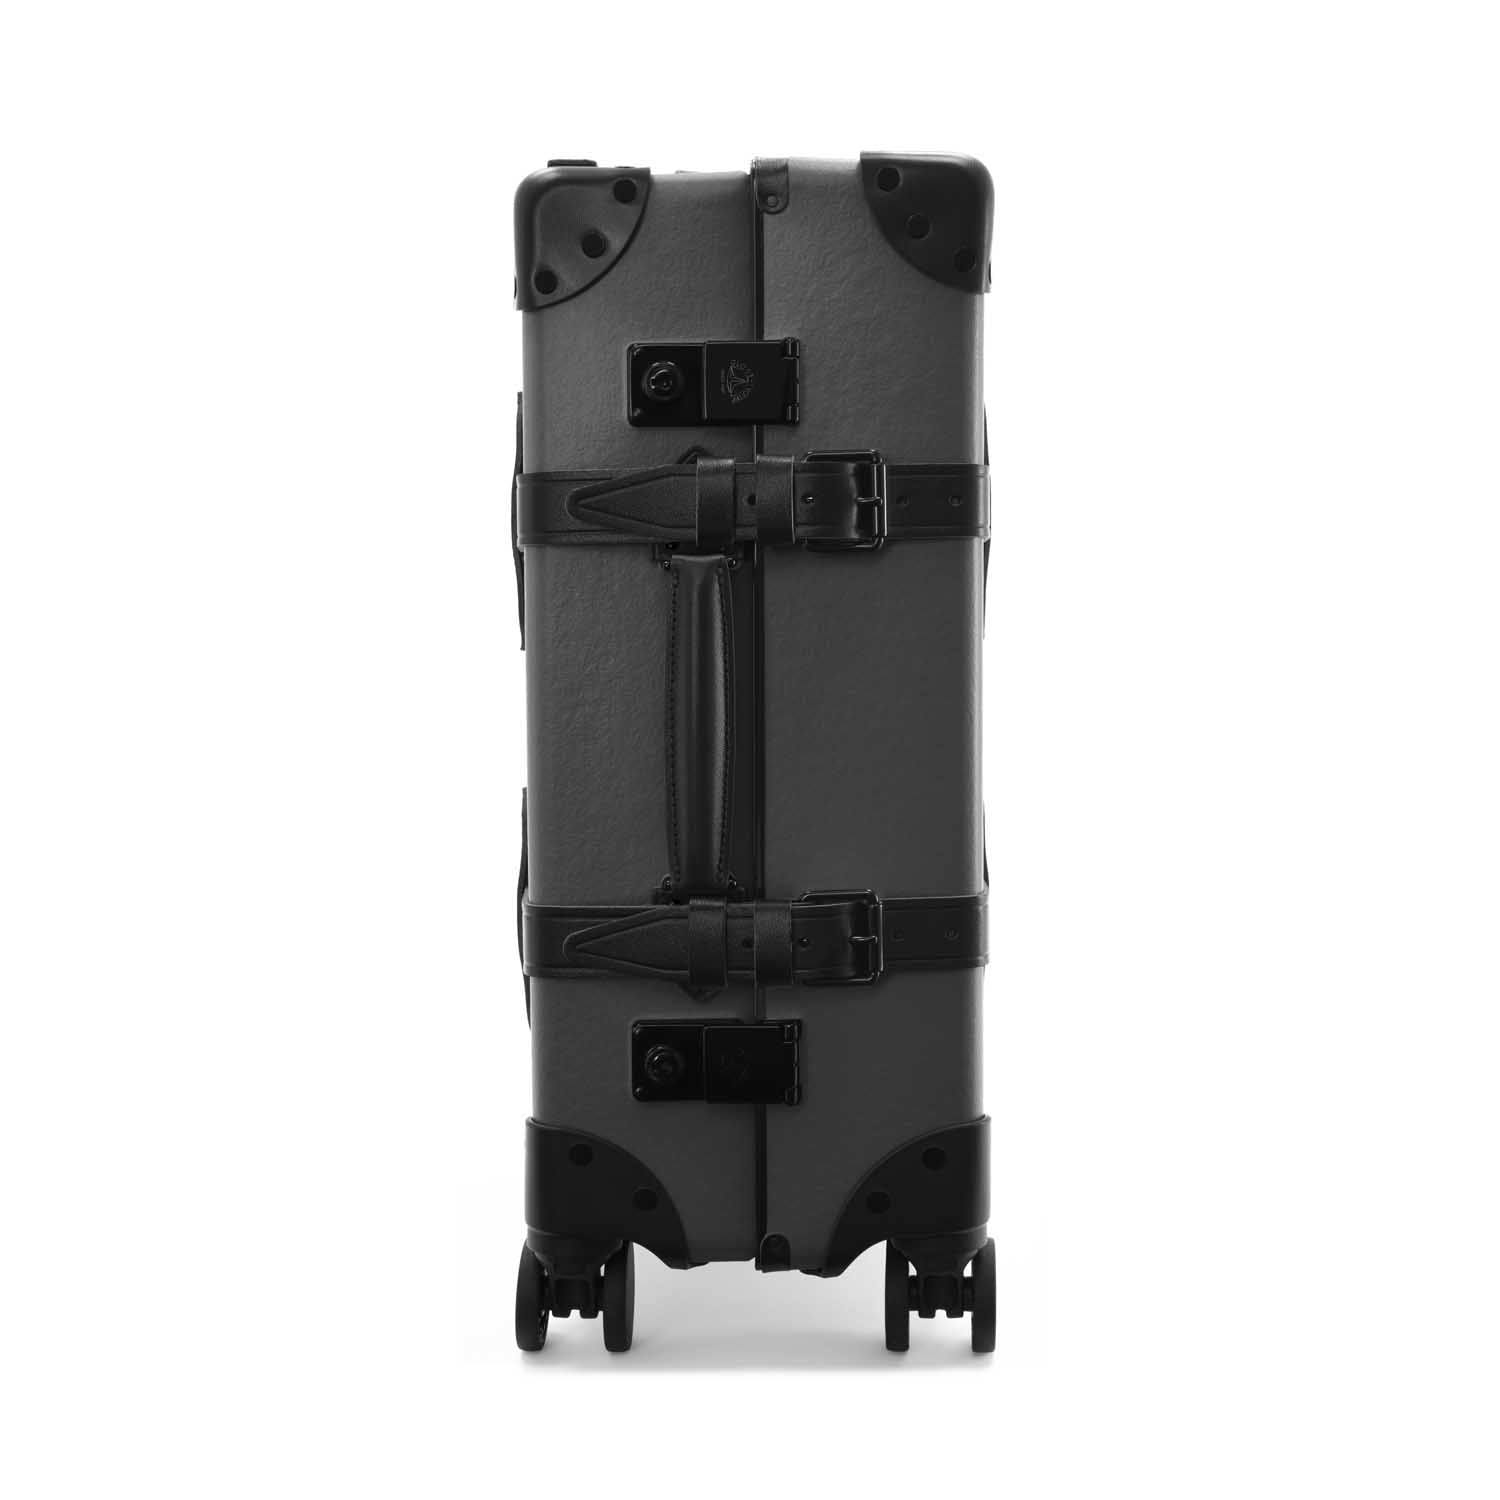 Centenary · Carry-On - 4 Wheels | Charcoal/Black/Black